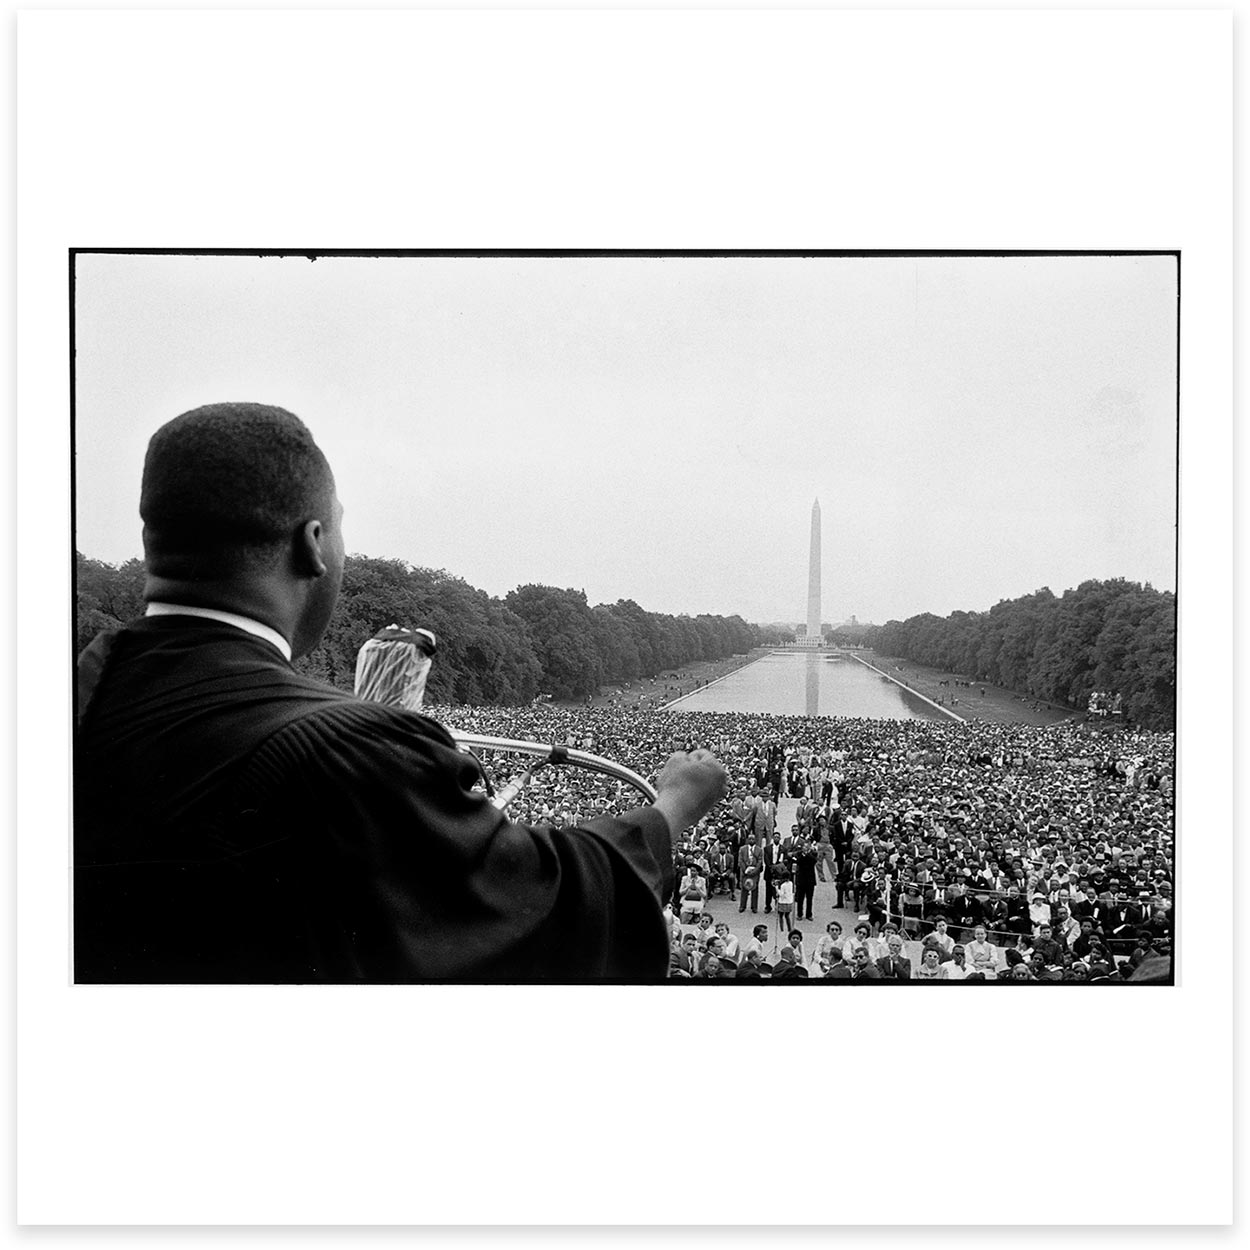 A photo of Dr. Martin Luther King speaking on the steps of the Lincoln Memorial.